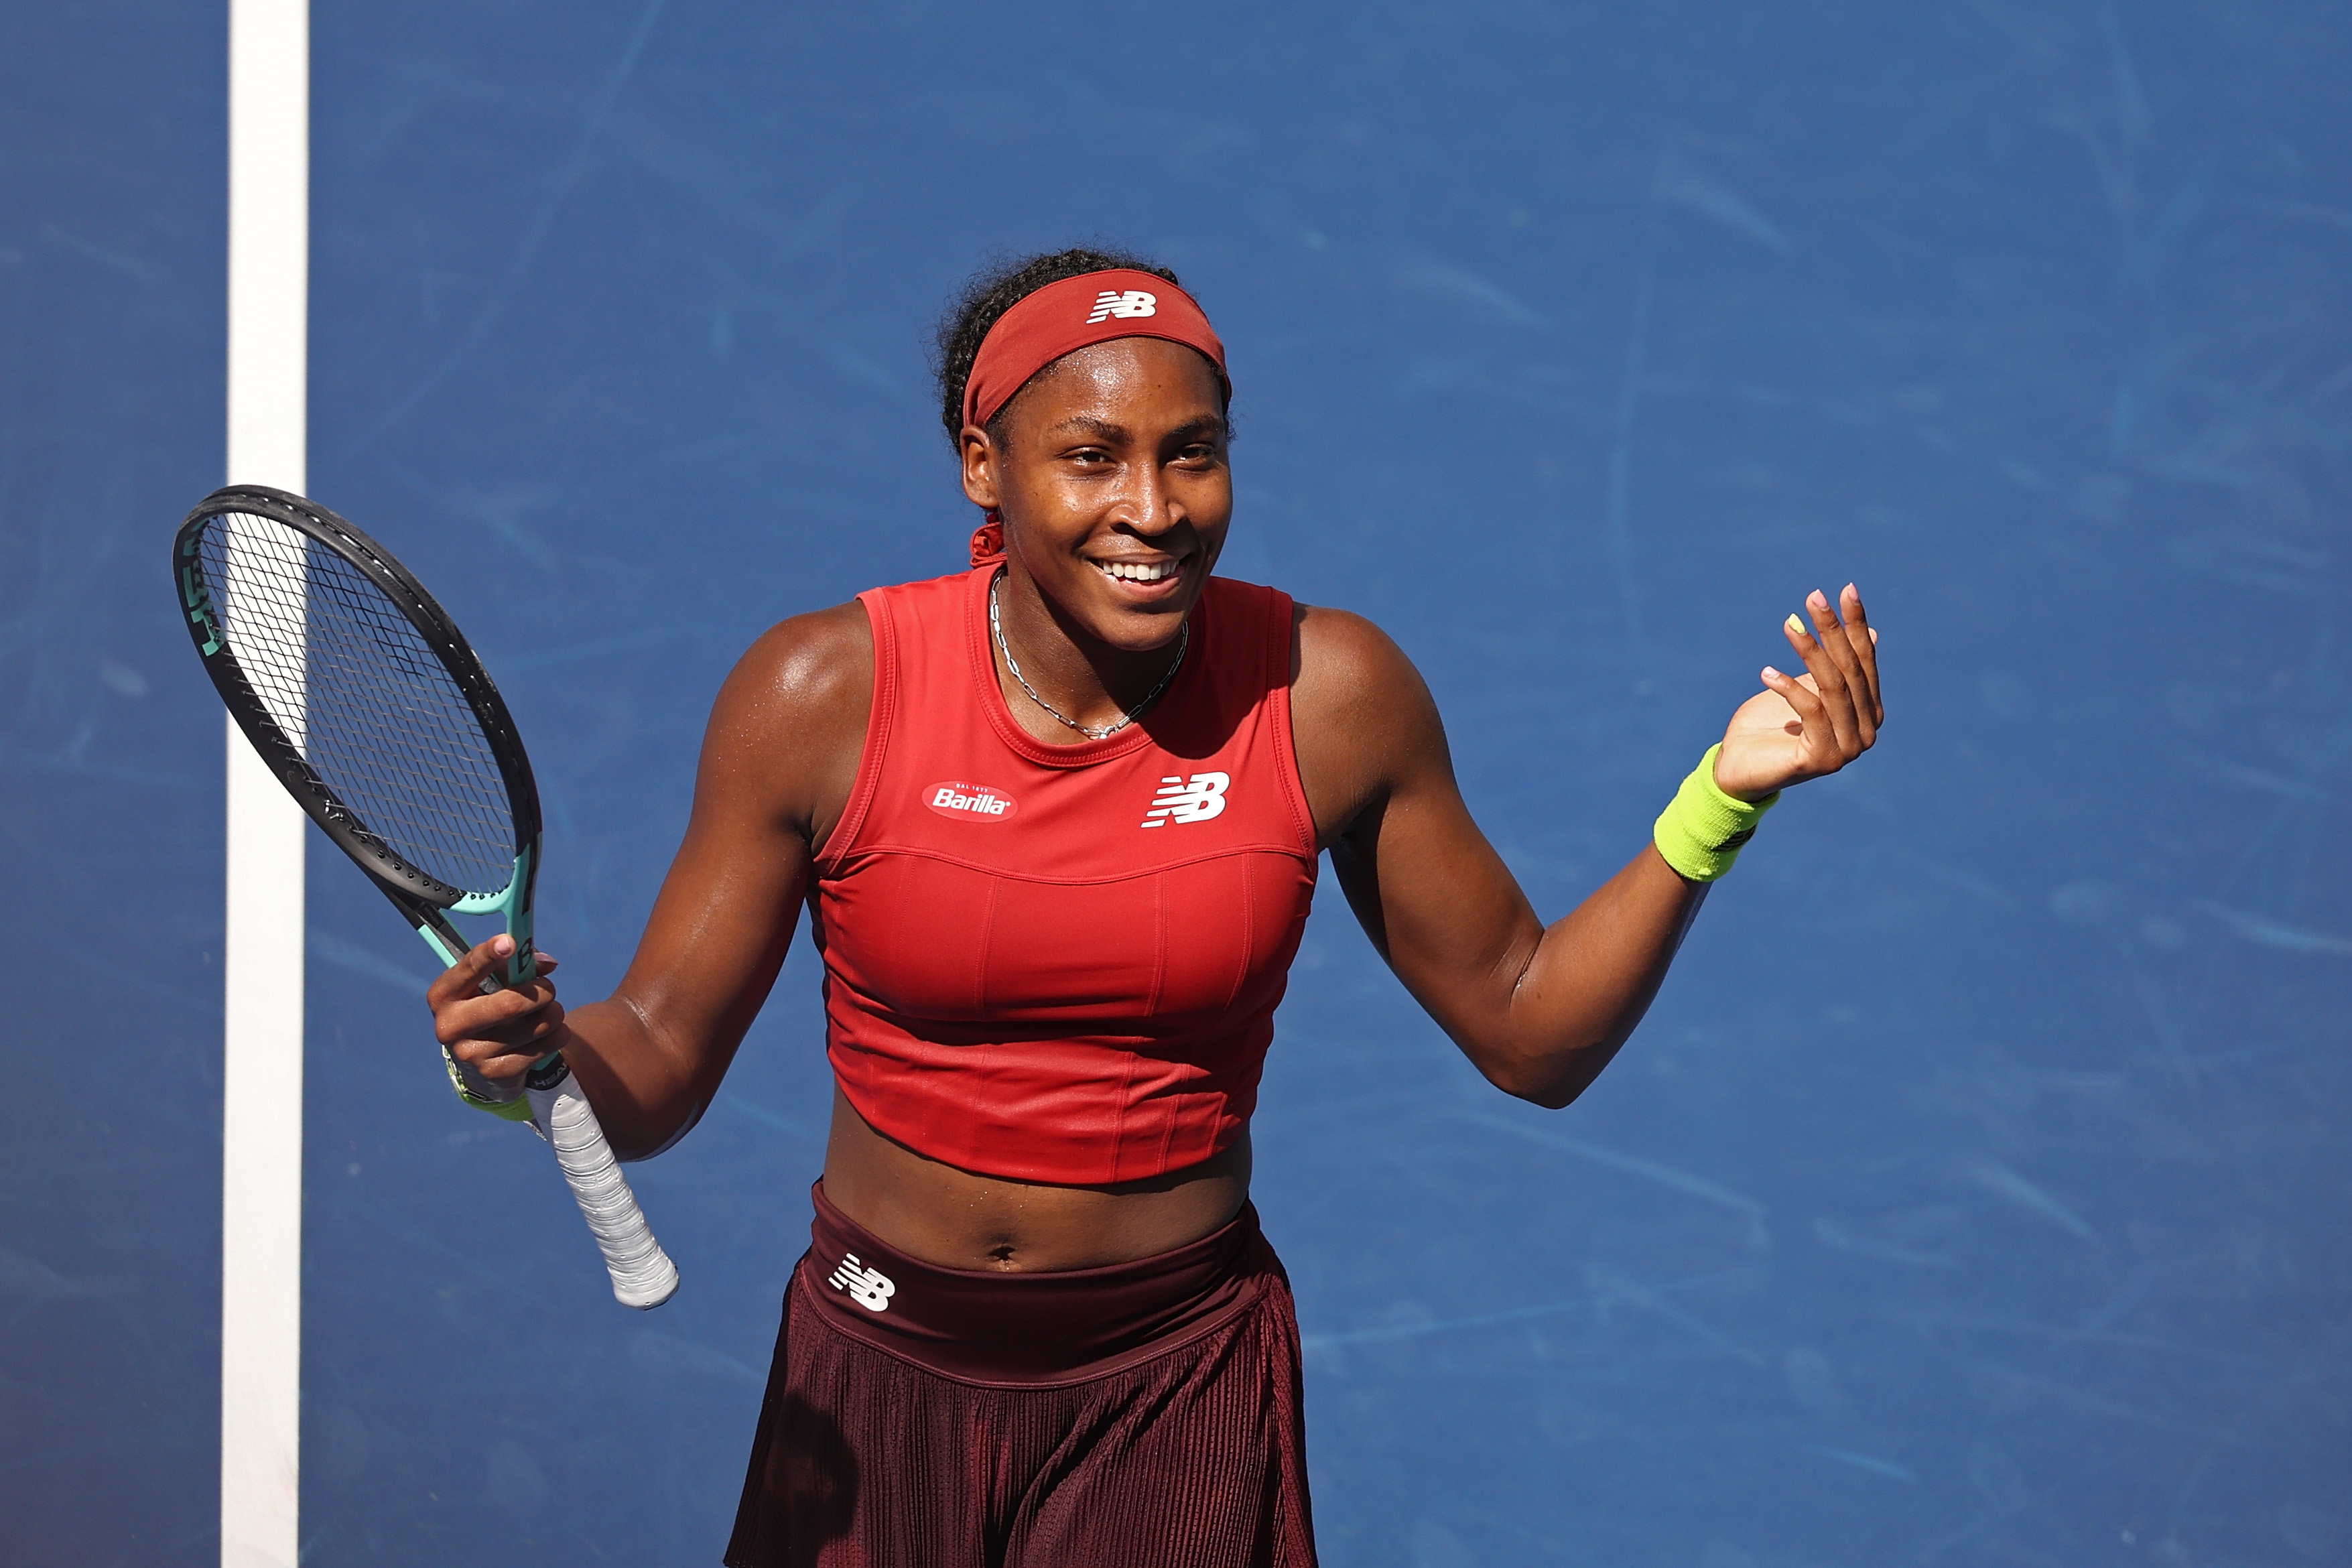 Coco Gauff reaches her first US Open semifinal at age 19 by beating Jelena Ostapenko 6-0, 6-2